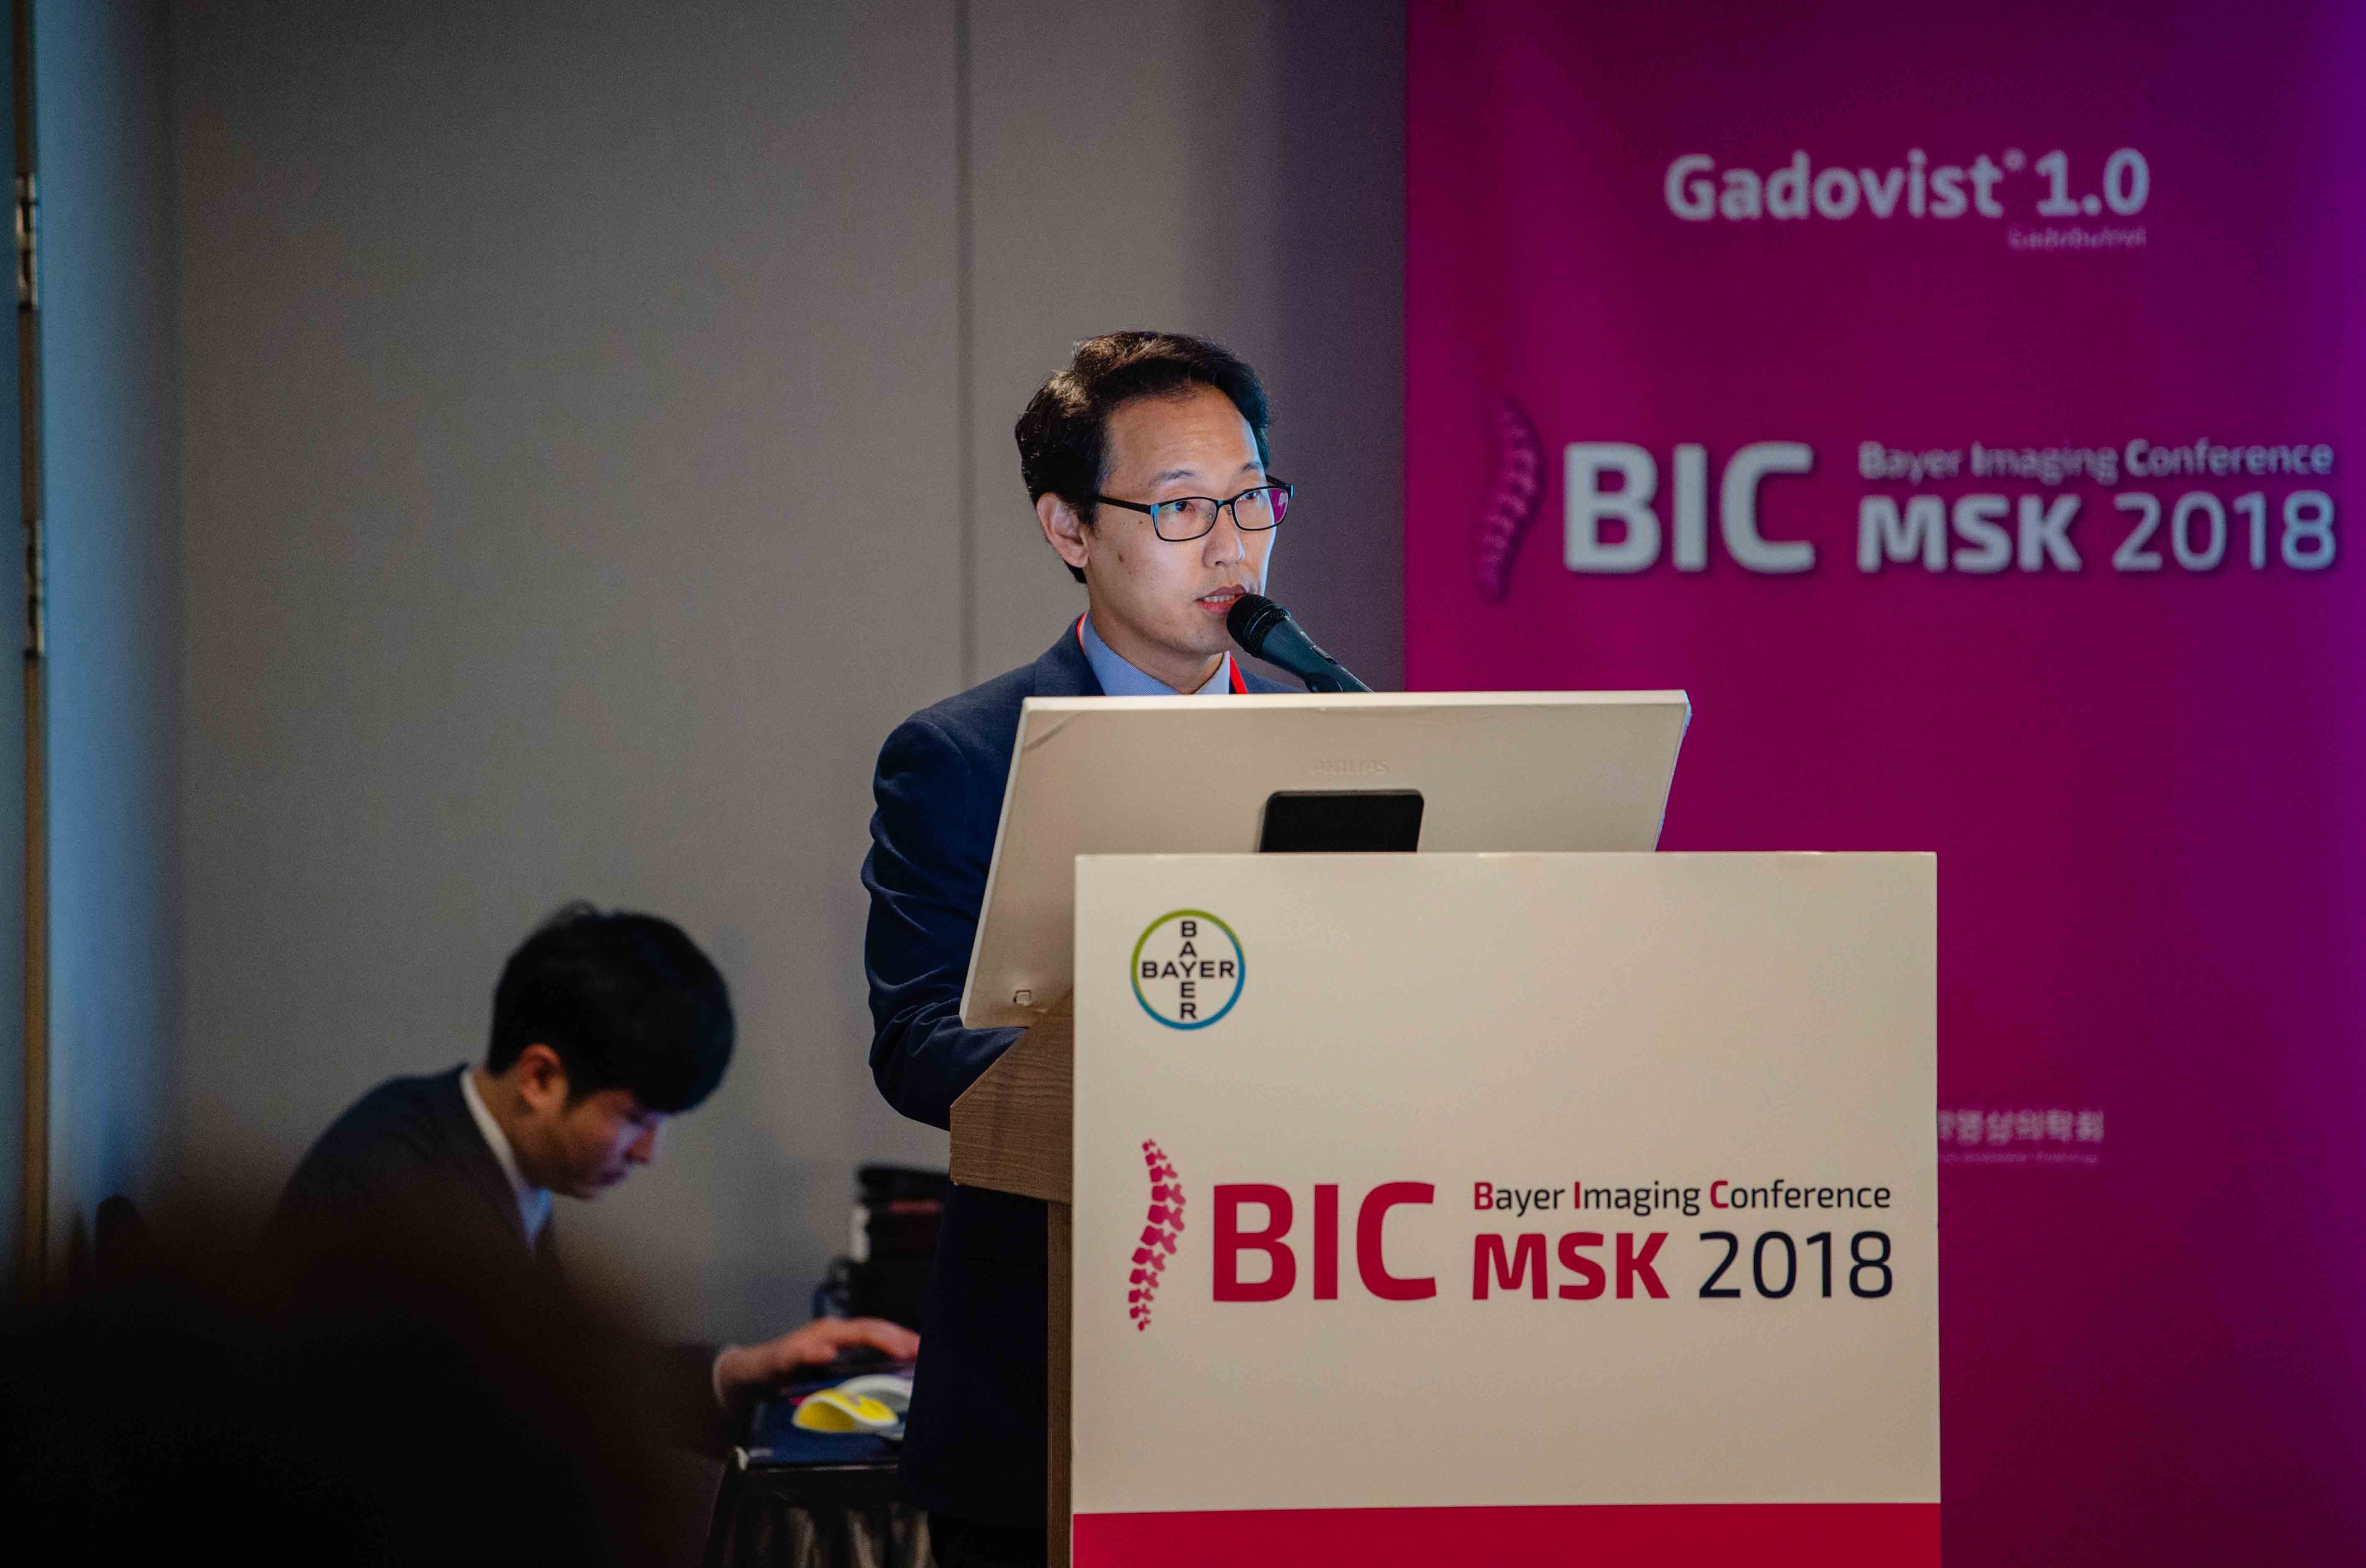 Bic MSK 2018 preview image